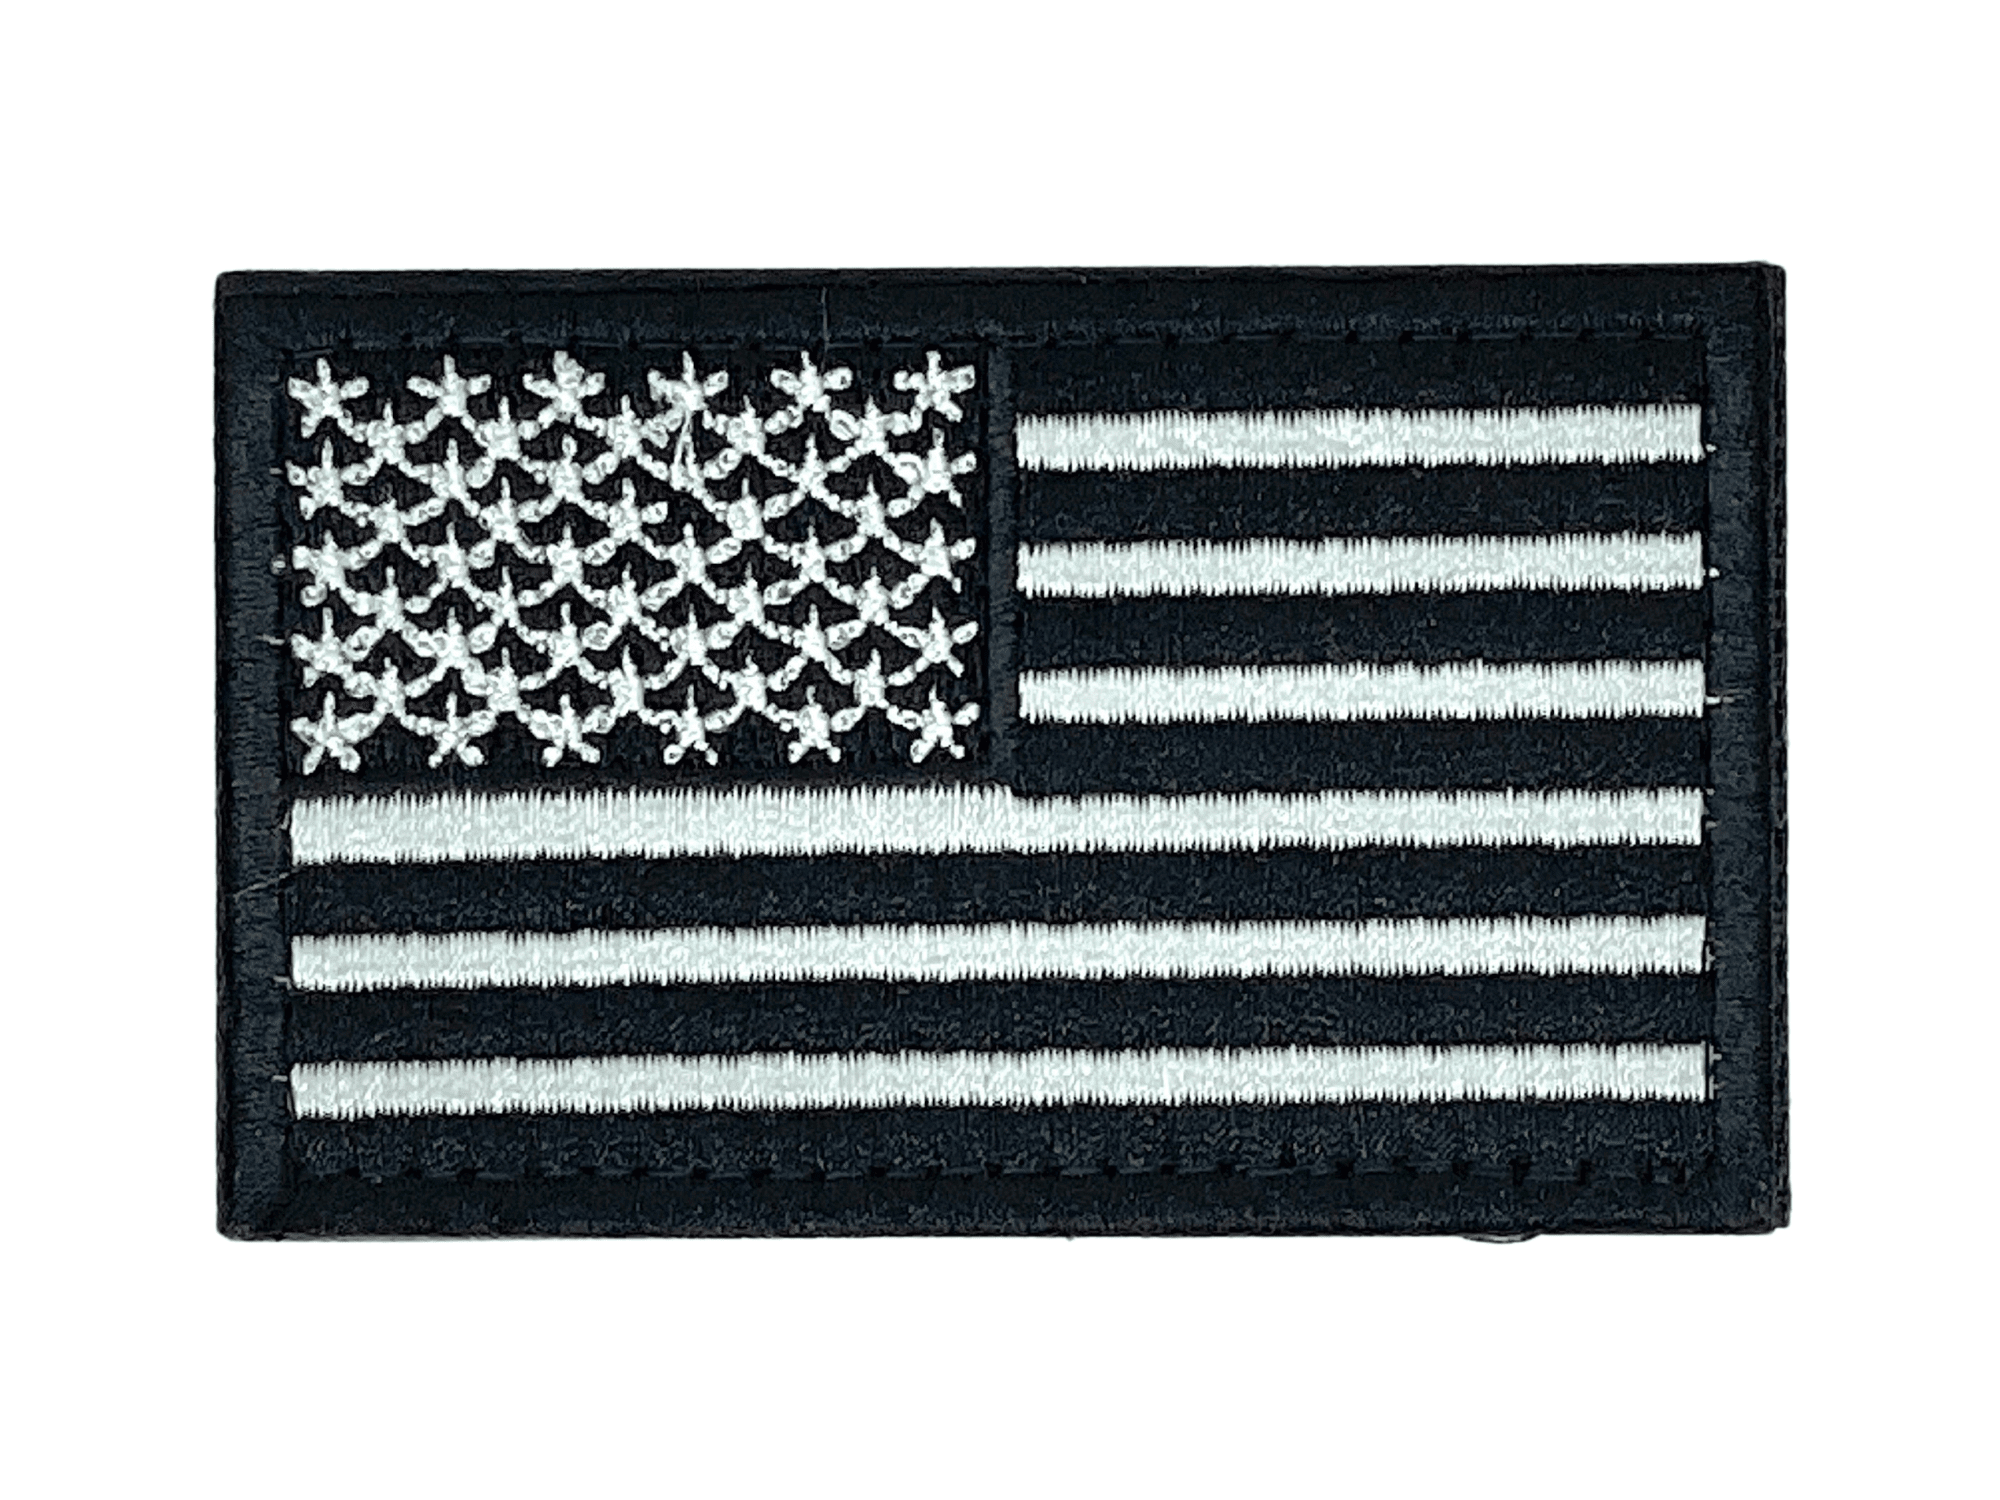 Nine Line Subdued USA Flag Patch Cloth Patch Uniforms Tactical Patch Hats Easy to Apply and Remove 2 x 3 Badge Vests Hook Backing Design Bags Detailed Embroidery 